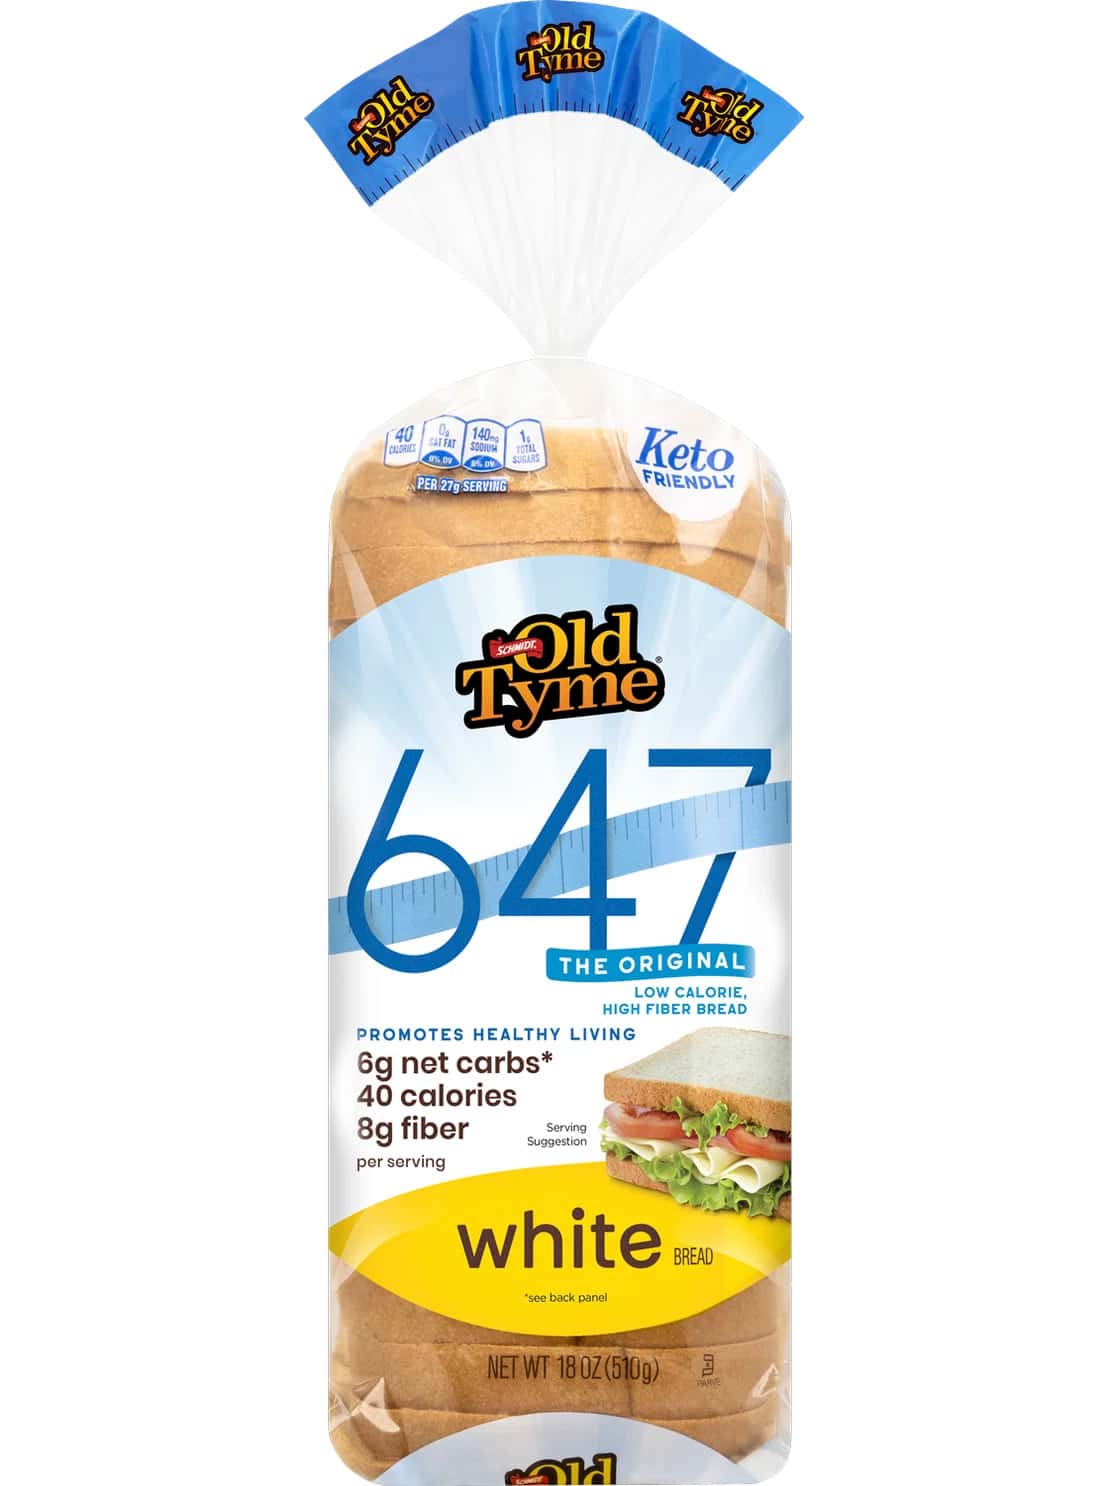 A loaf of Old Tyme 647 bread white sliced.